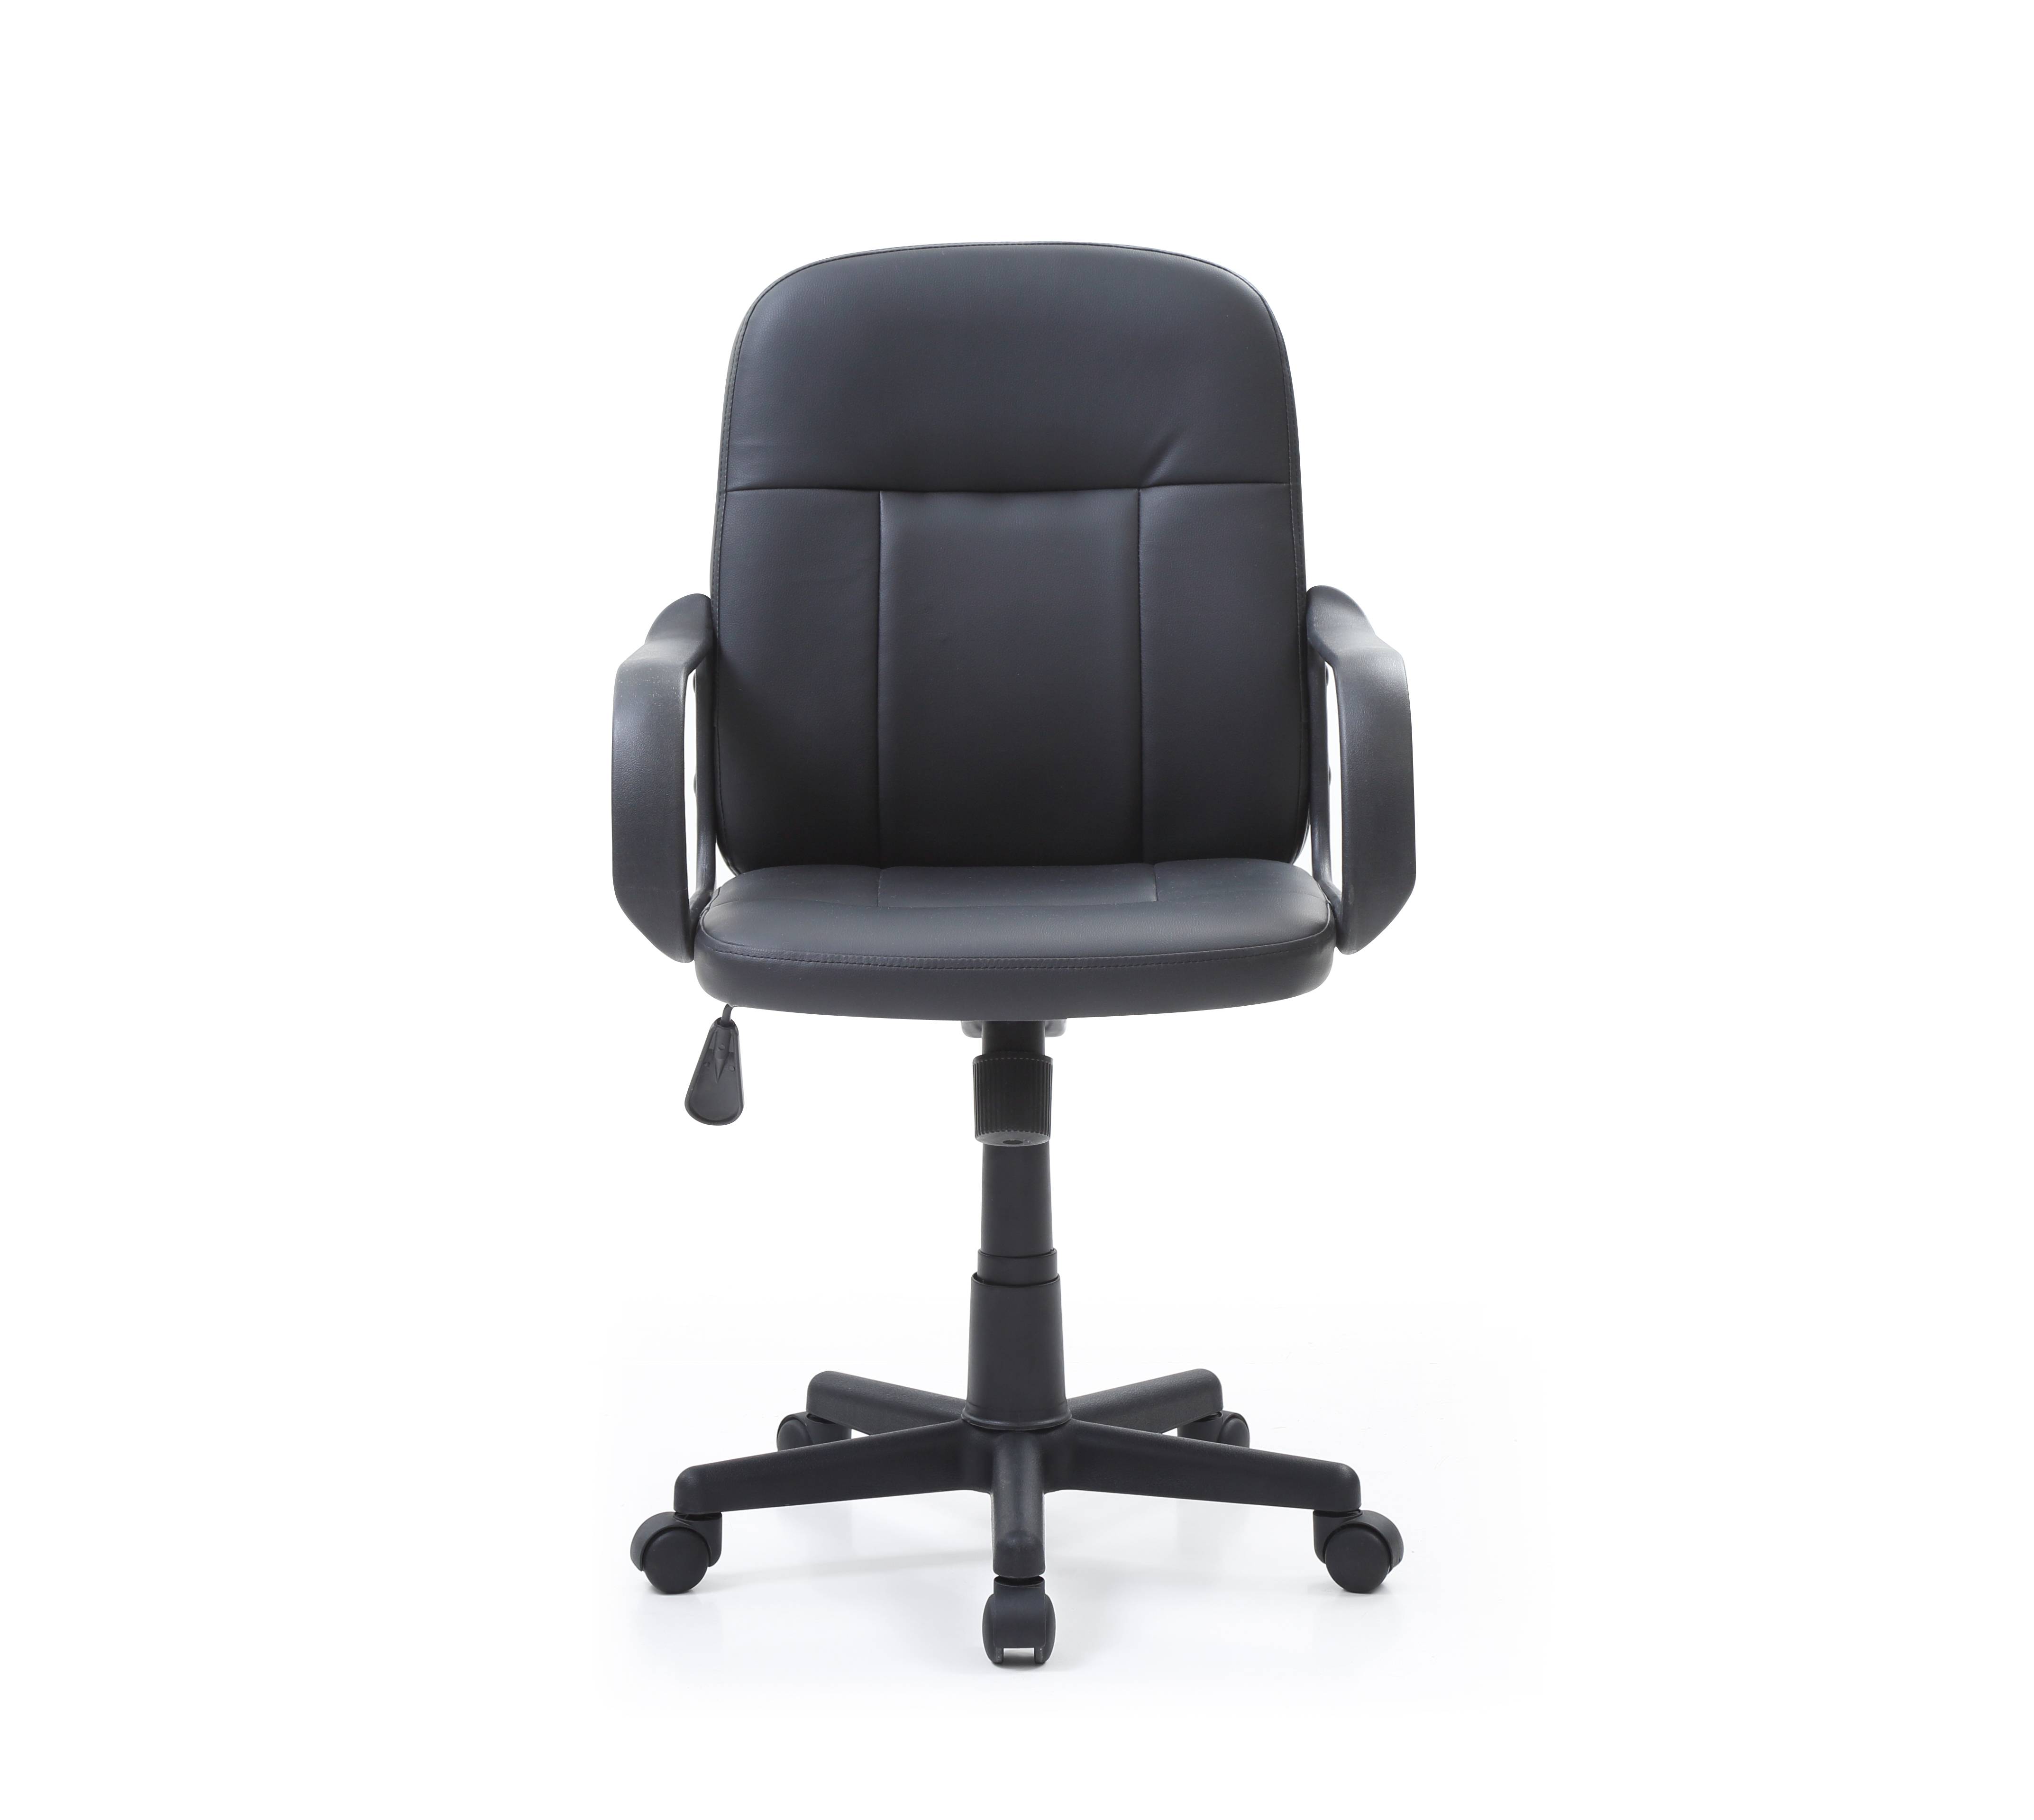 Hodedah 19.5 in Manager's Chair with Adjustable Height & Swivel, 200 lb. Capacity, Black - image 5 of 5